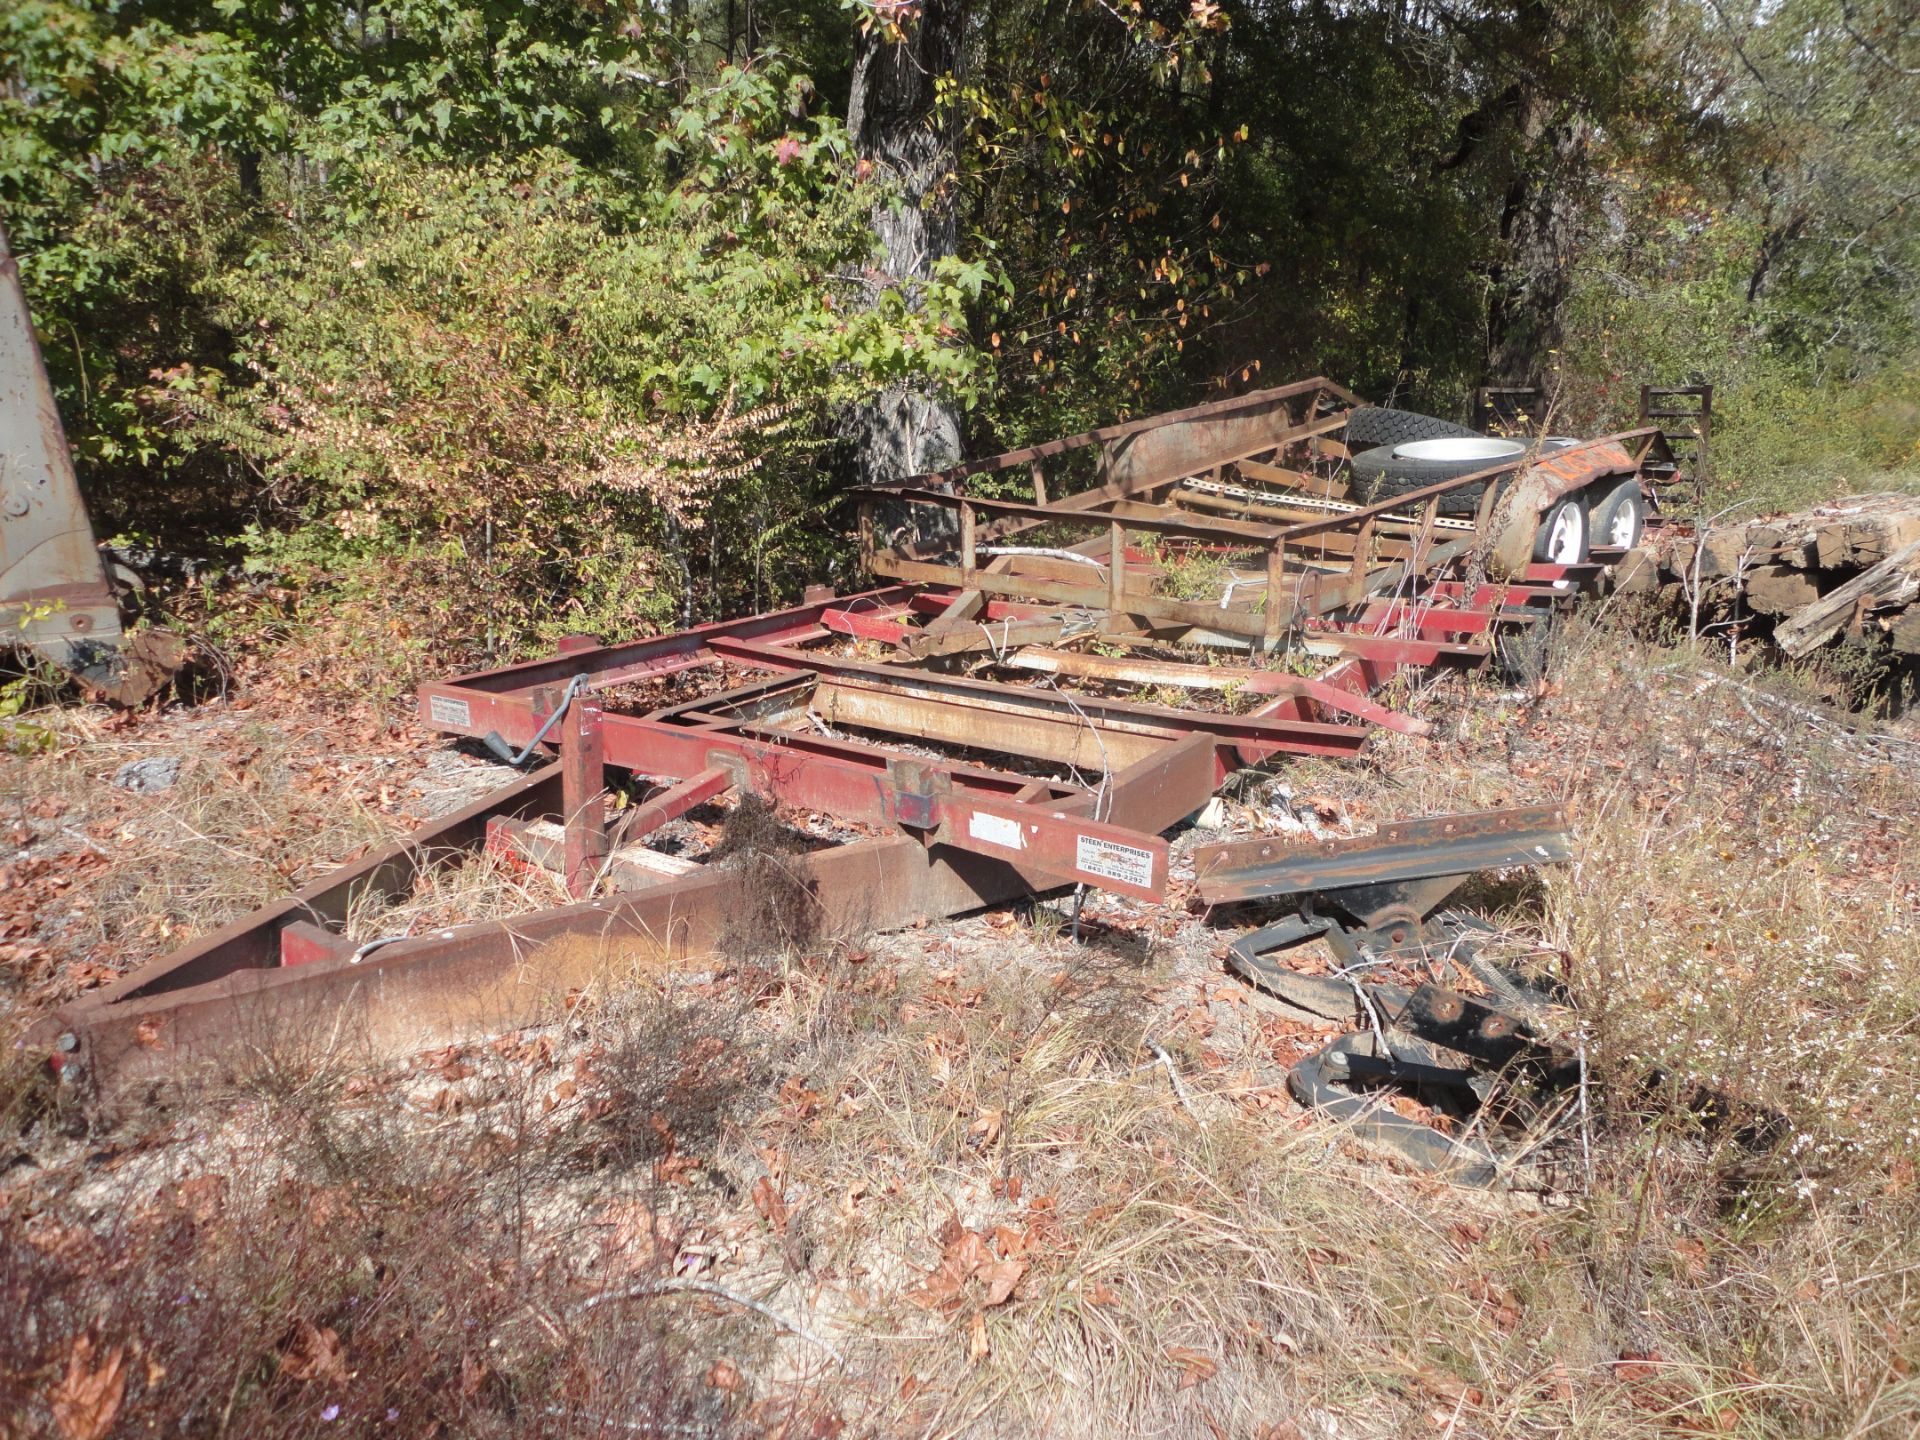 (LOT) (3) HITCH TRAILERS TANDEM AXLE OUT OF SERVICE UTILITY TRAILERS - Image 3 of 4